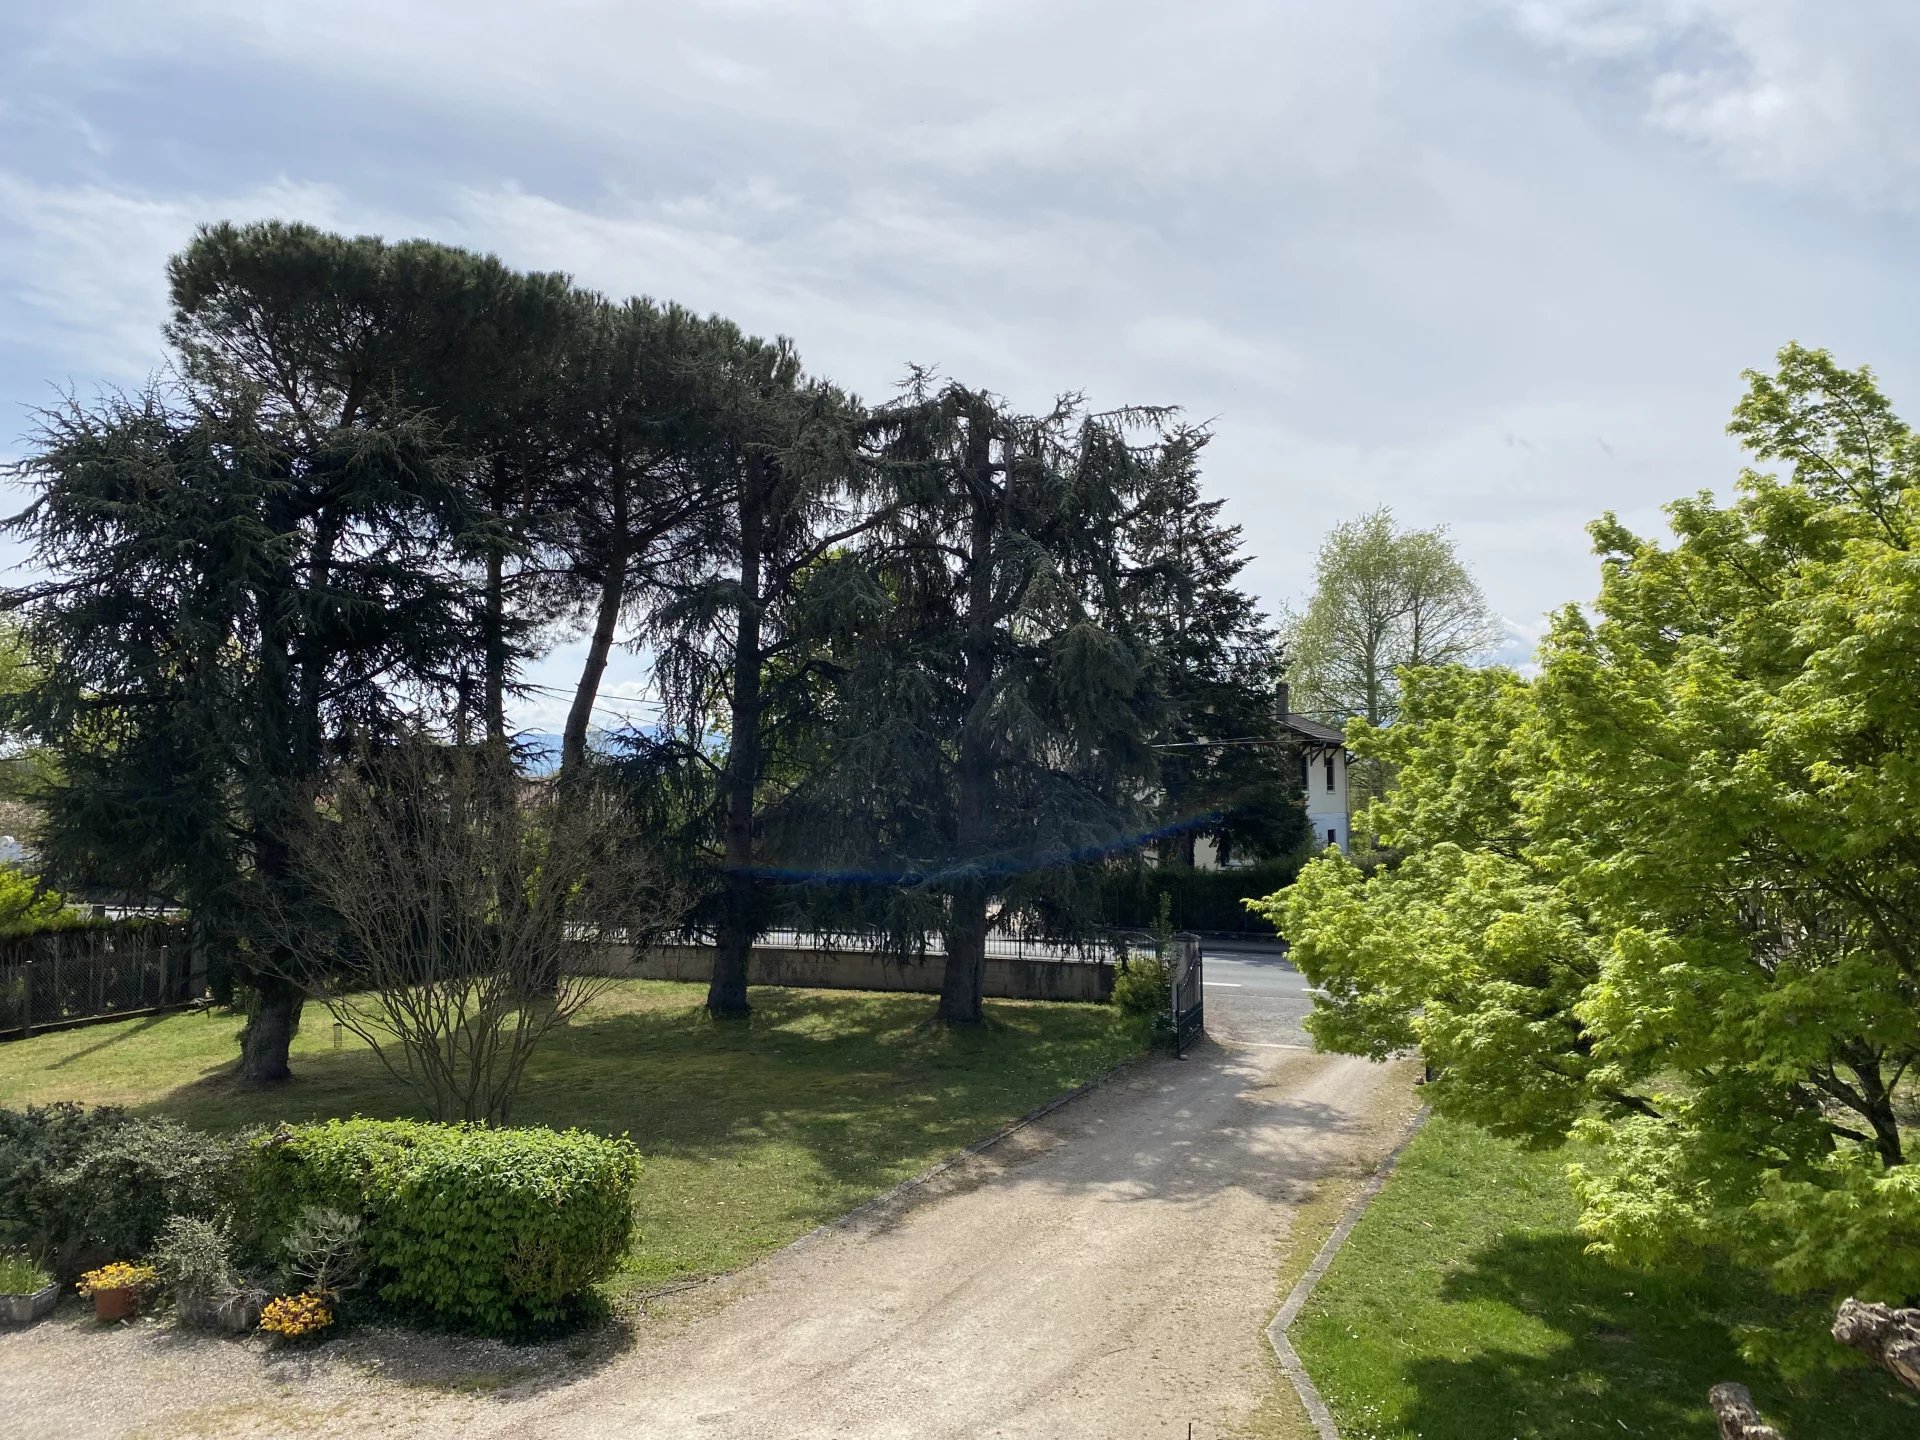 Near St Gaudens, house T6 of 178m ² on 7575 m² of land